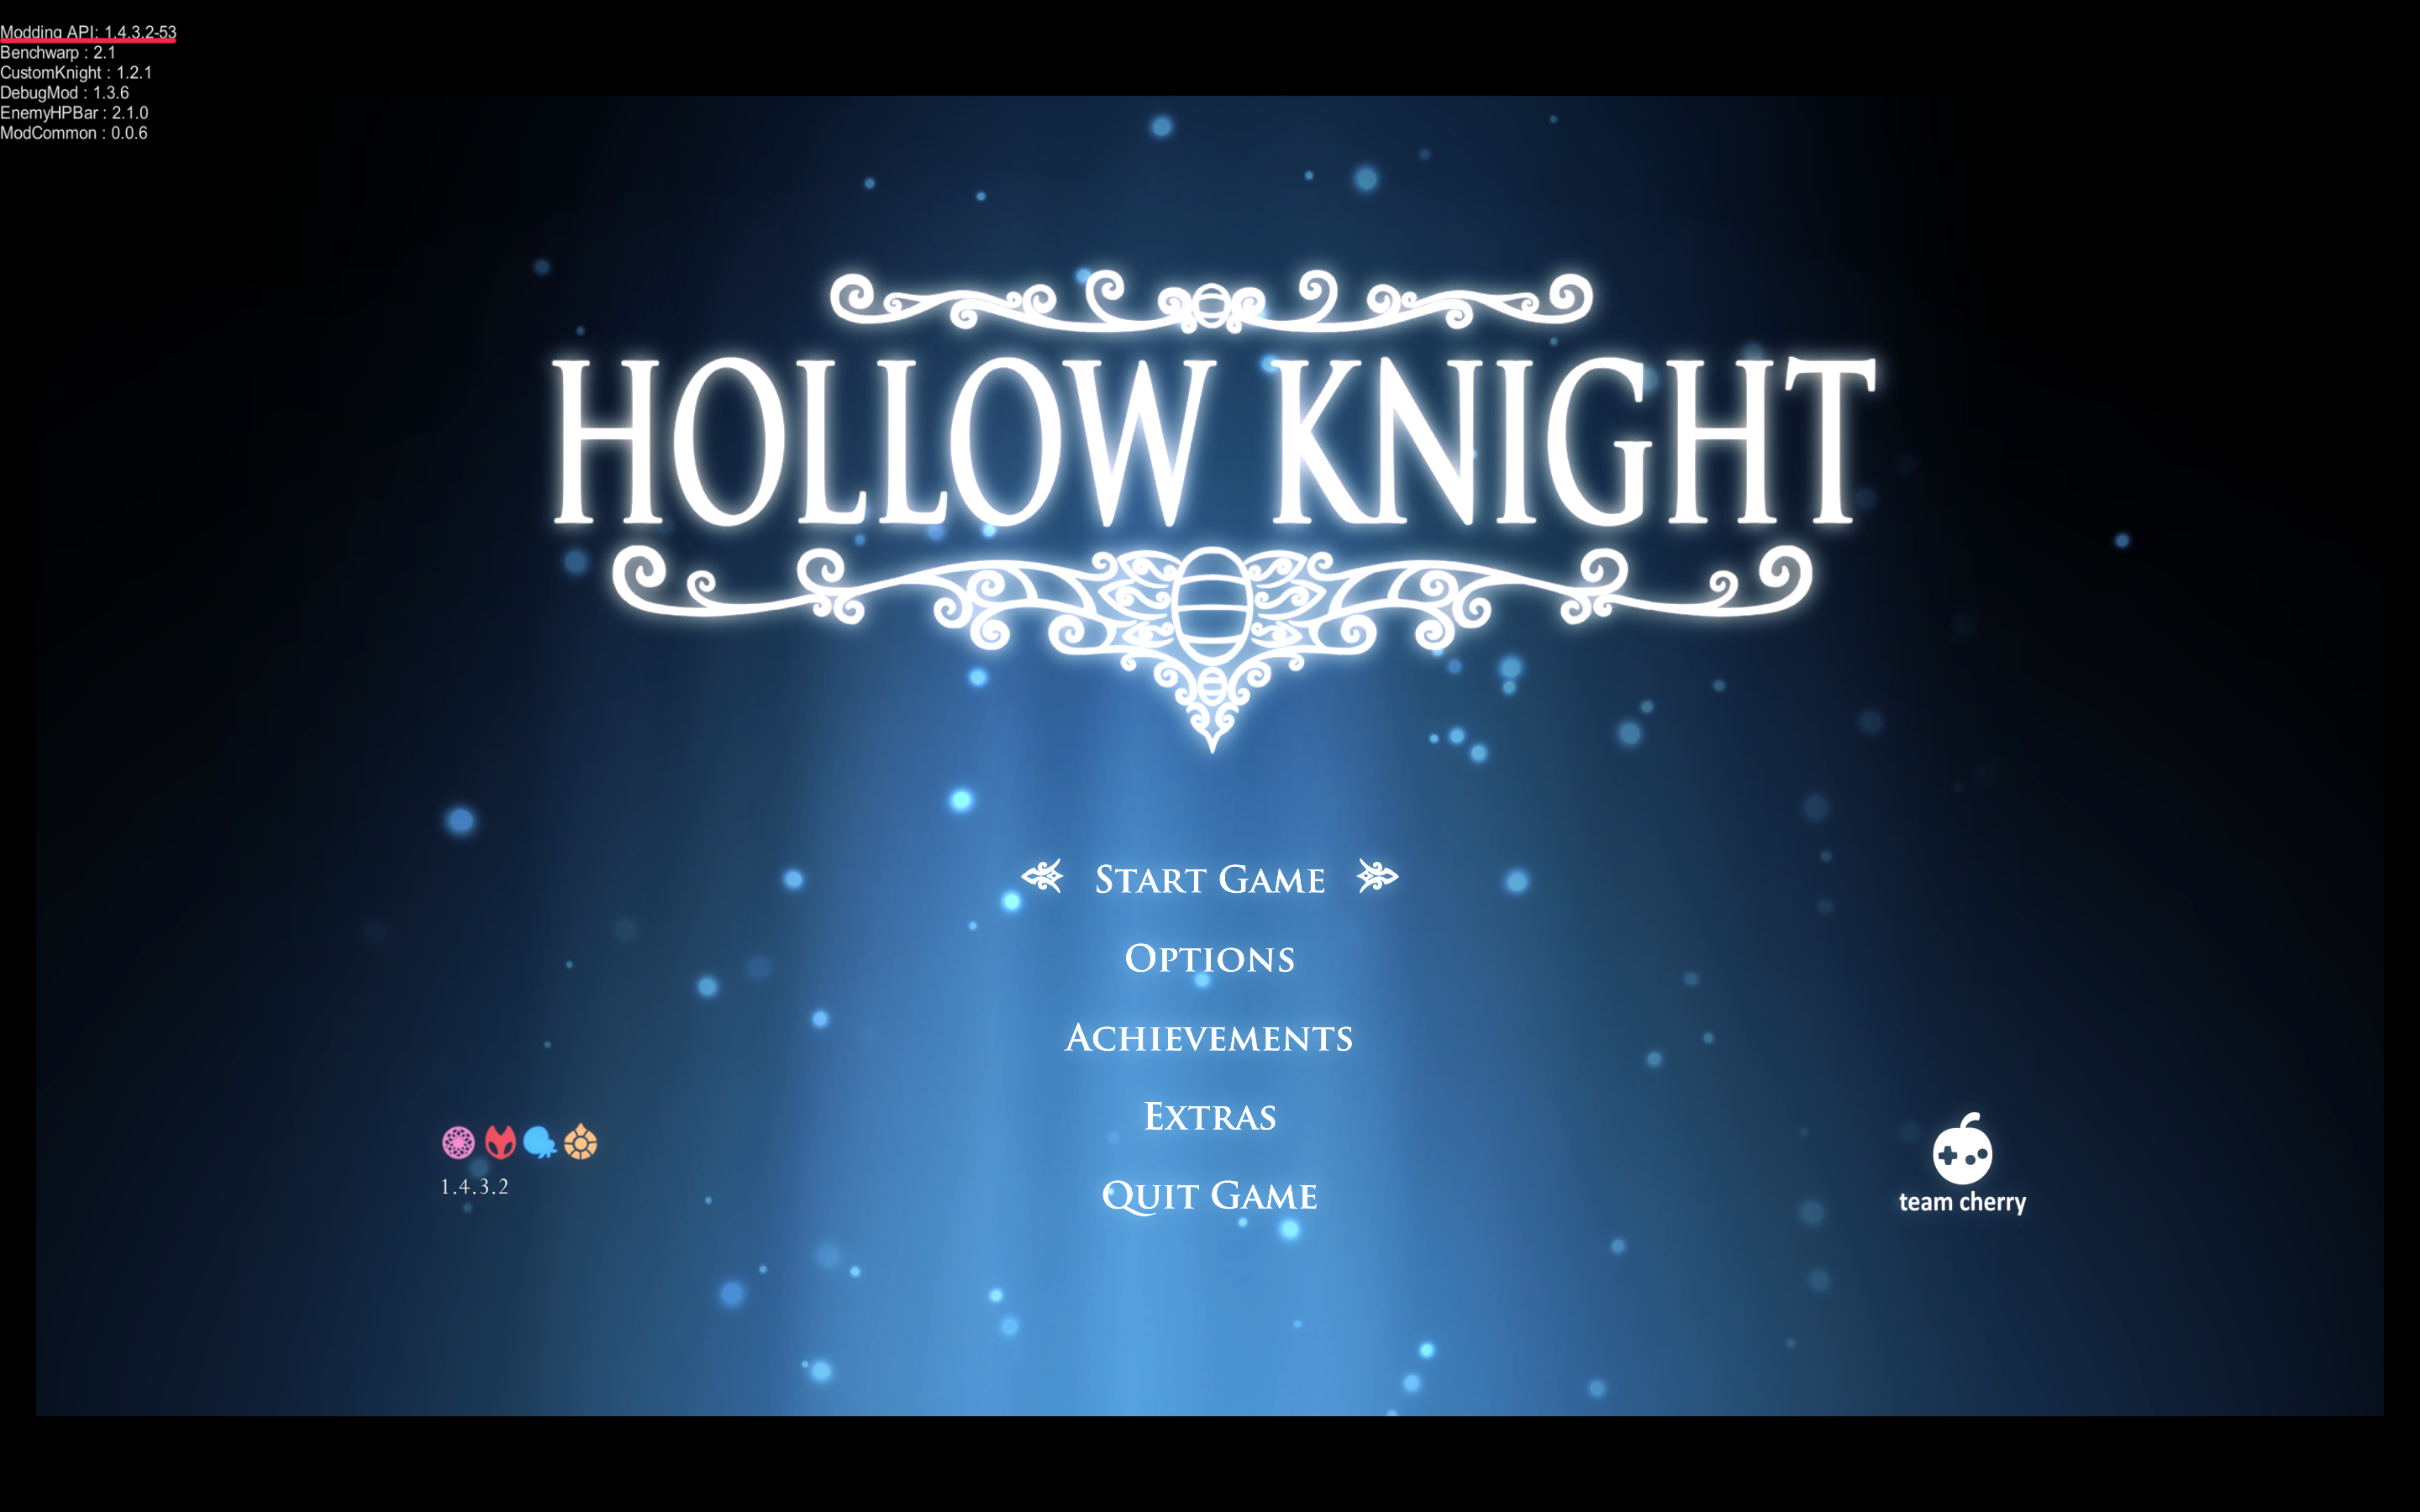 I downloaded a DLC for Hollow Knight but I can't install it with